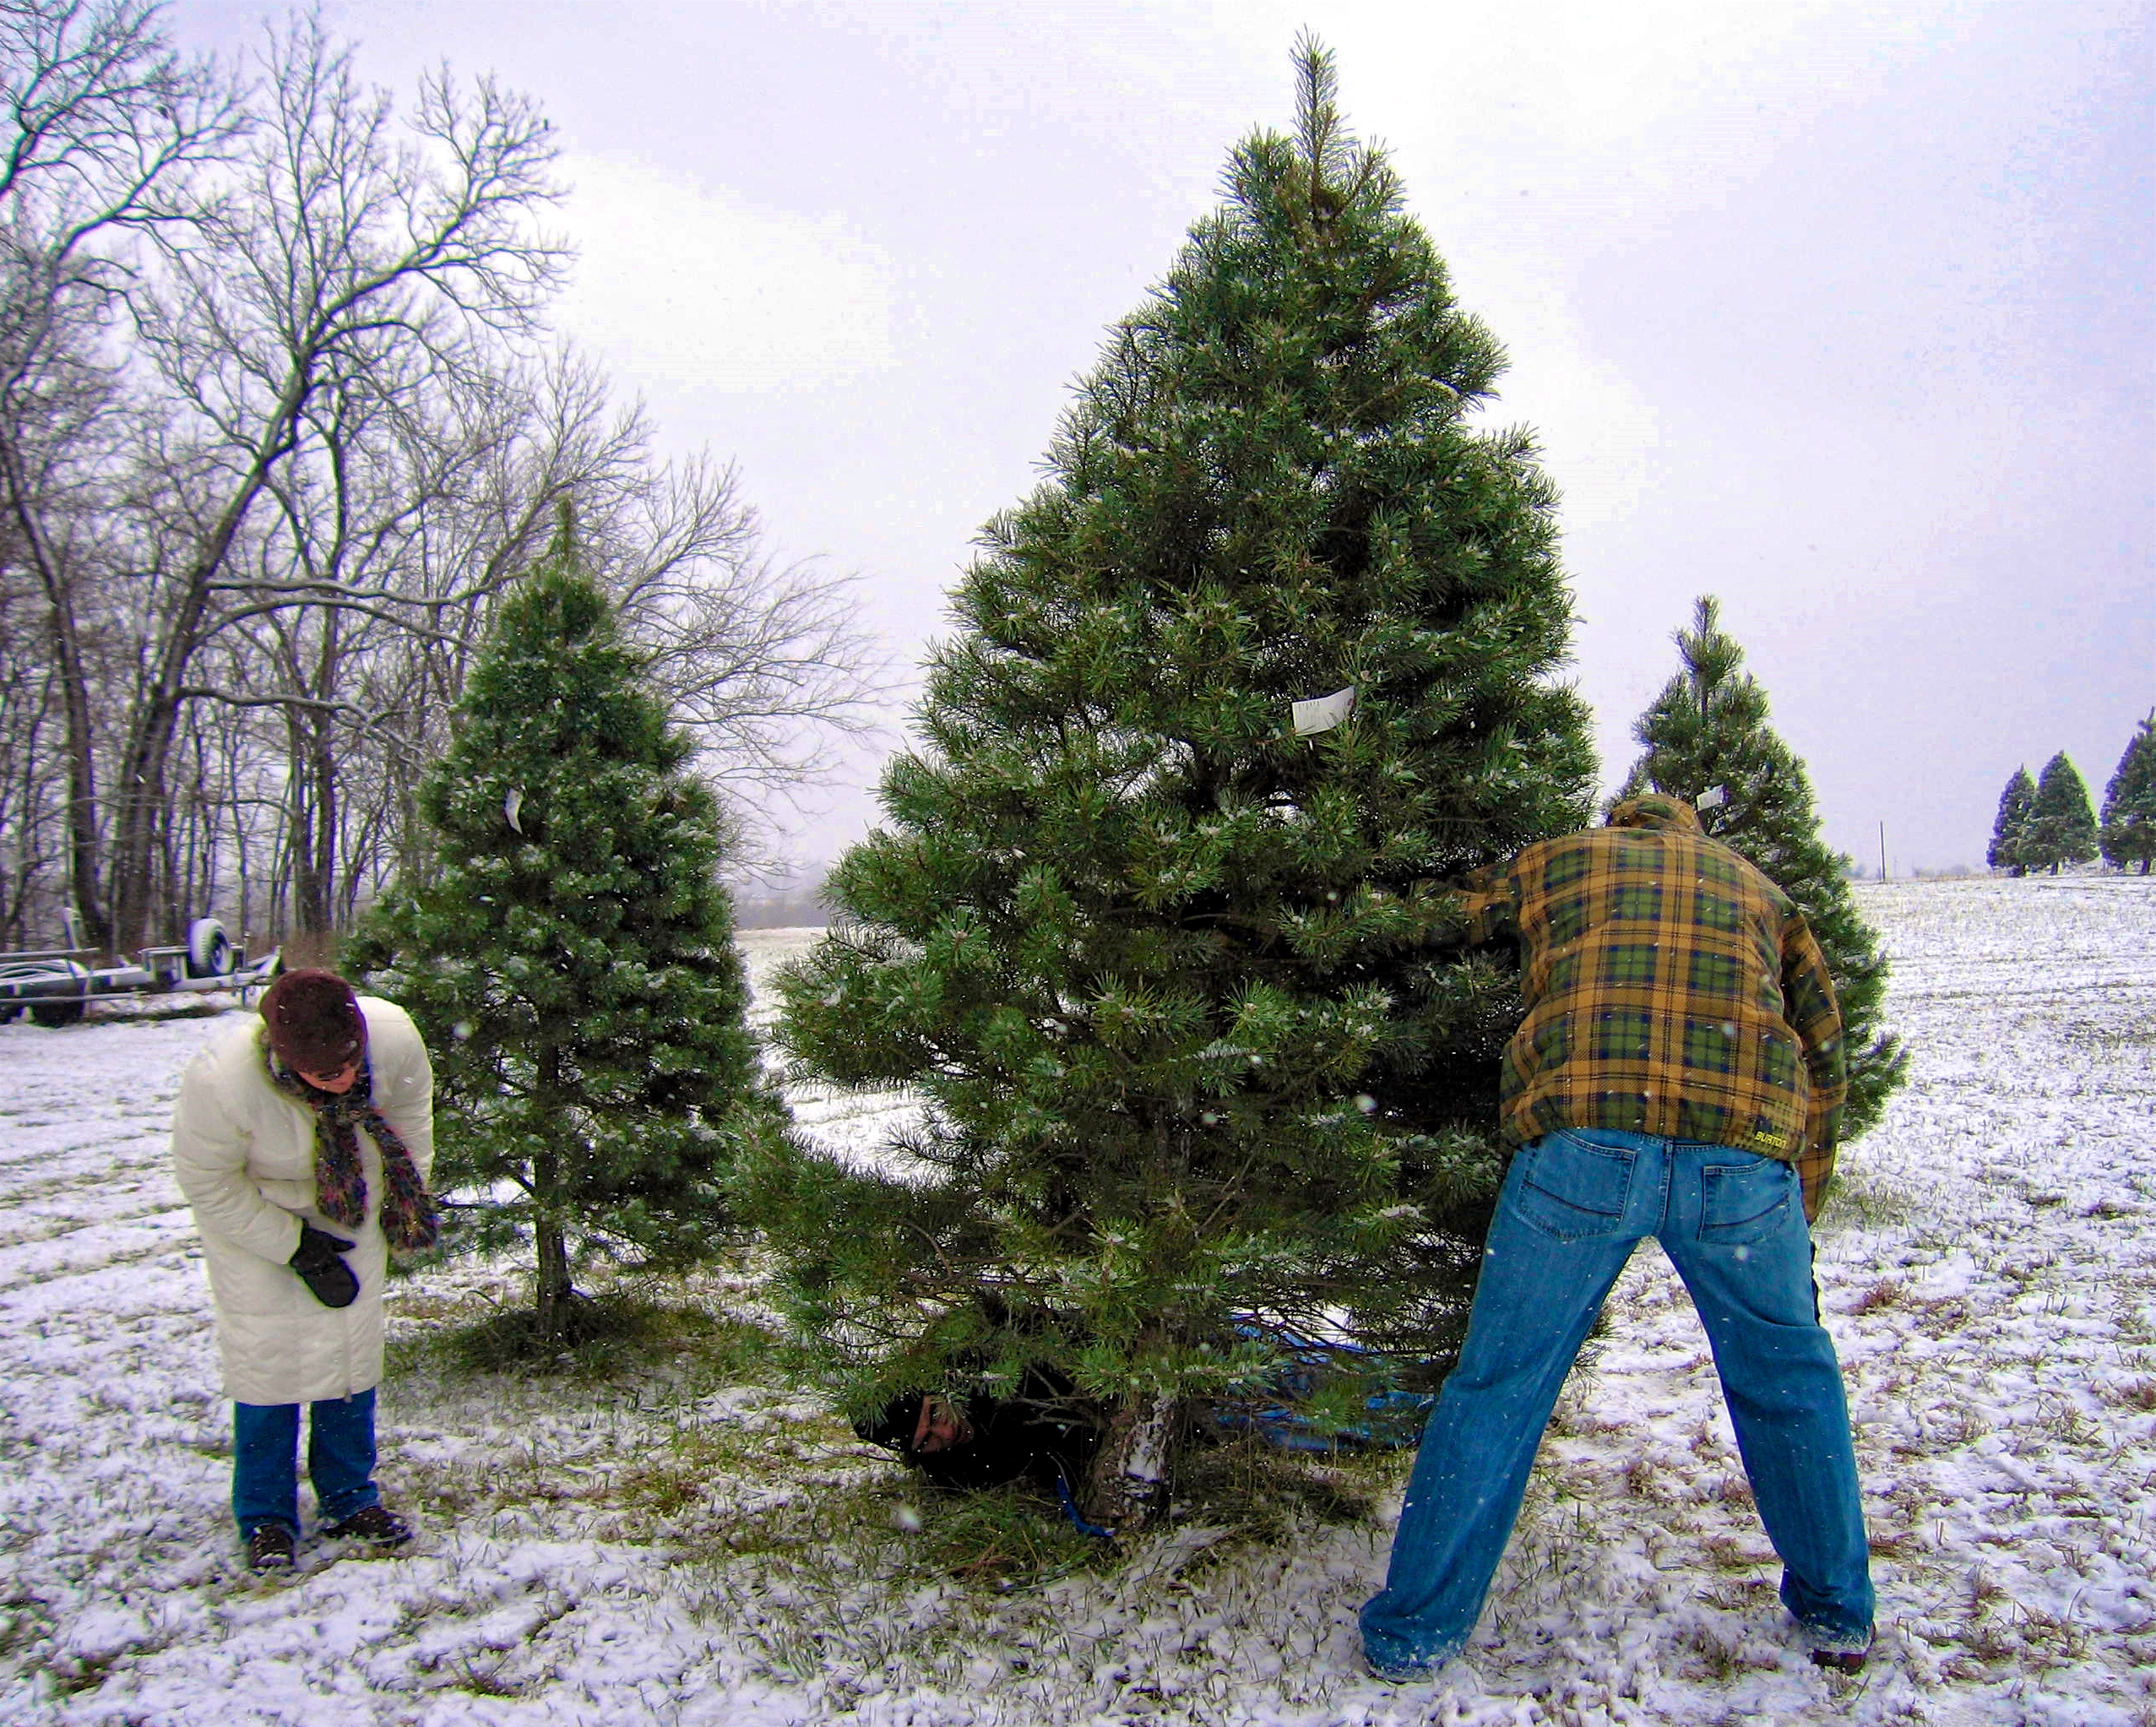 A man chops down a christmas tree for a woman who is bending over watching him fell the tree. There is snow on the ground and two christmas trees near by.